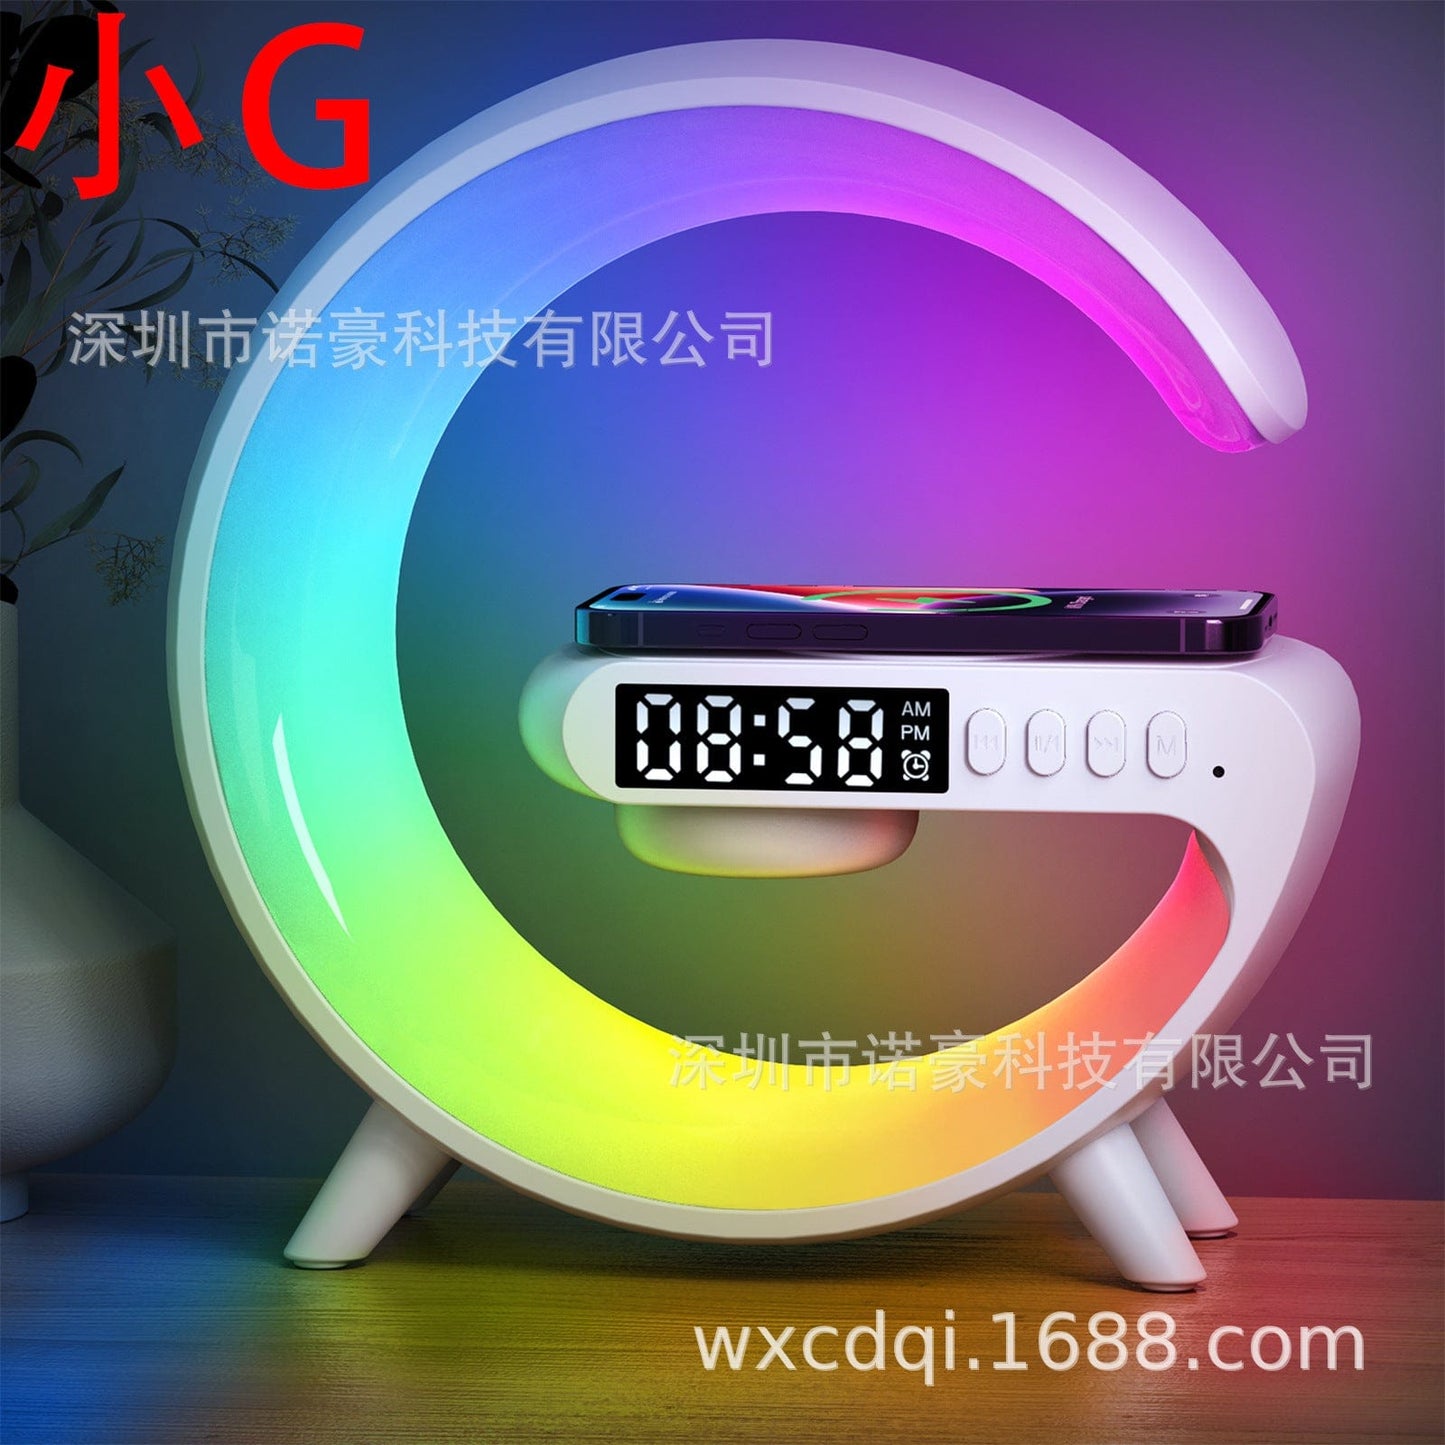 Large G audio, Bluetooth speaker, small G atmosphere light connection, wireless charger, bedside music wake-up light, Bluetooth audio